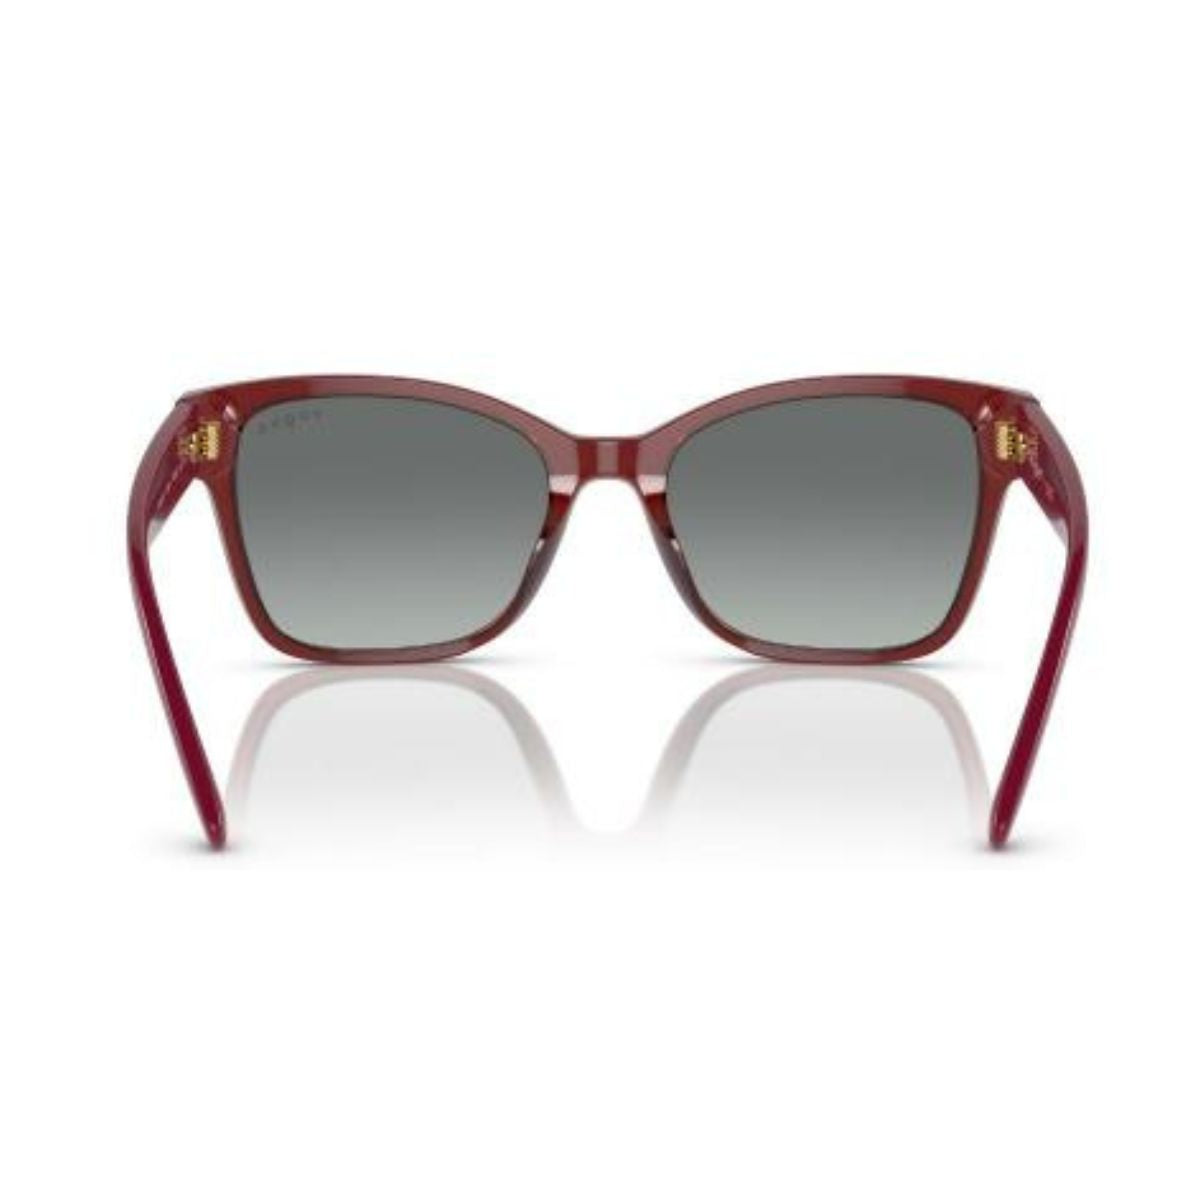 "Red Colour Cat Eye Sunglasses For Womens"